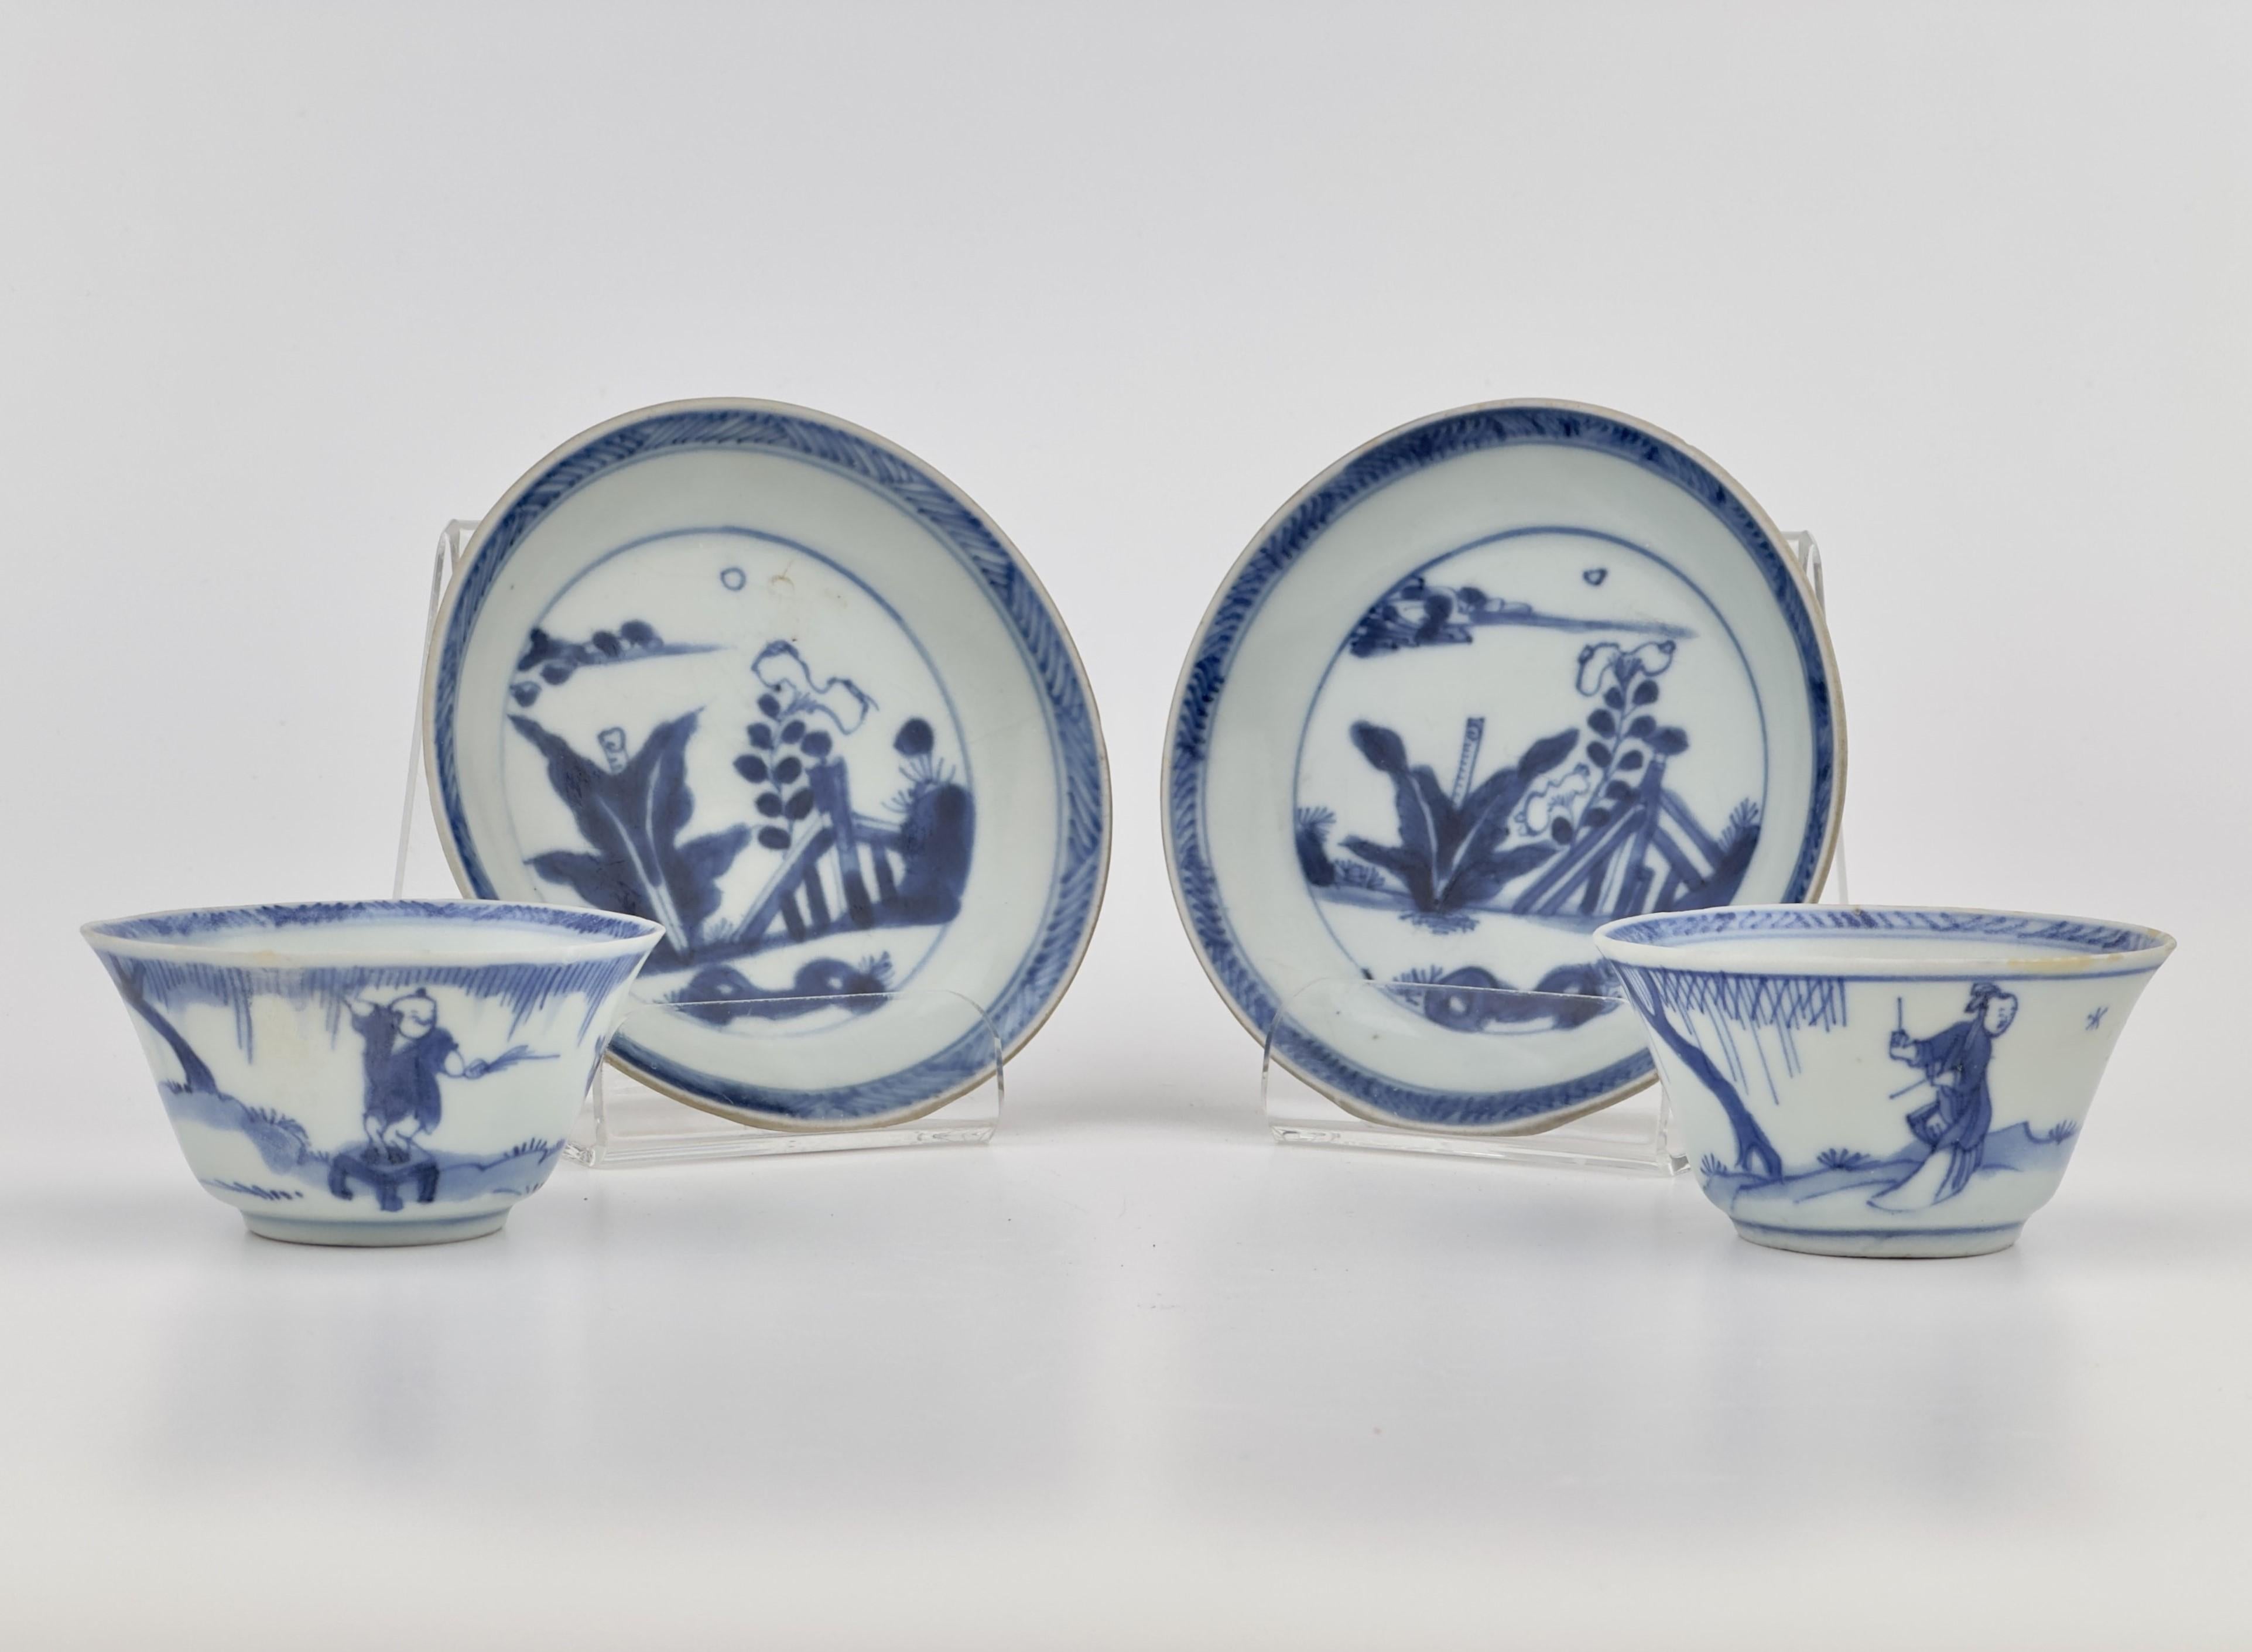 Blue and White Tea Set c 1725, Qing Dynasty, Yongzheng Reign For Sale 5